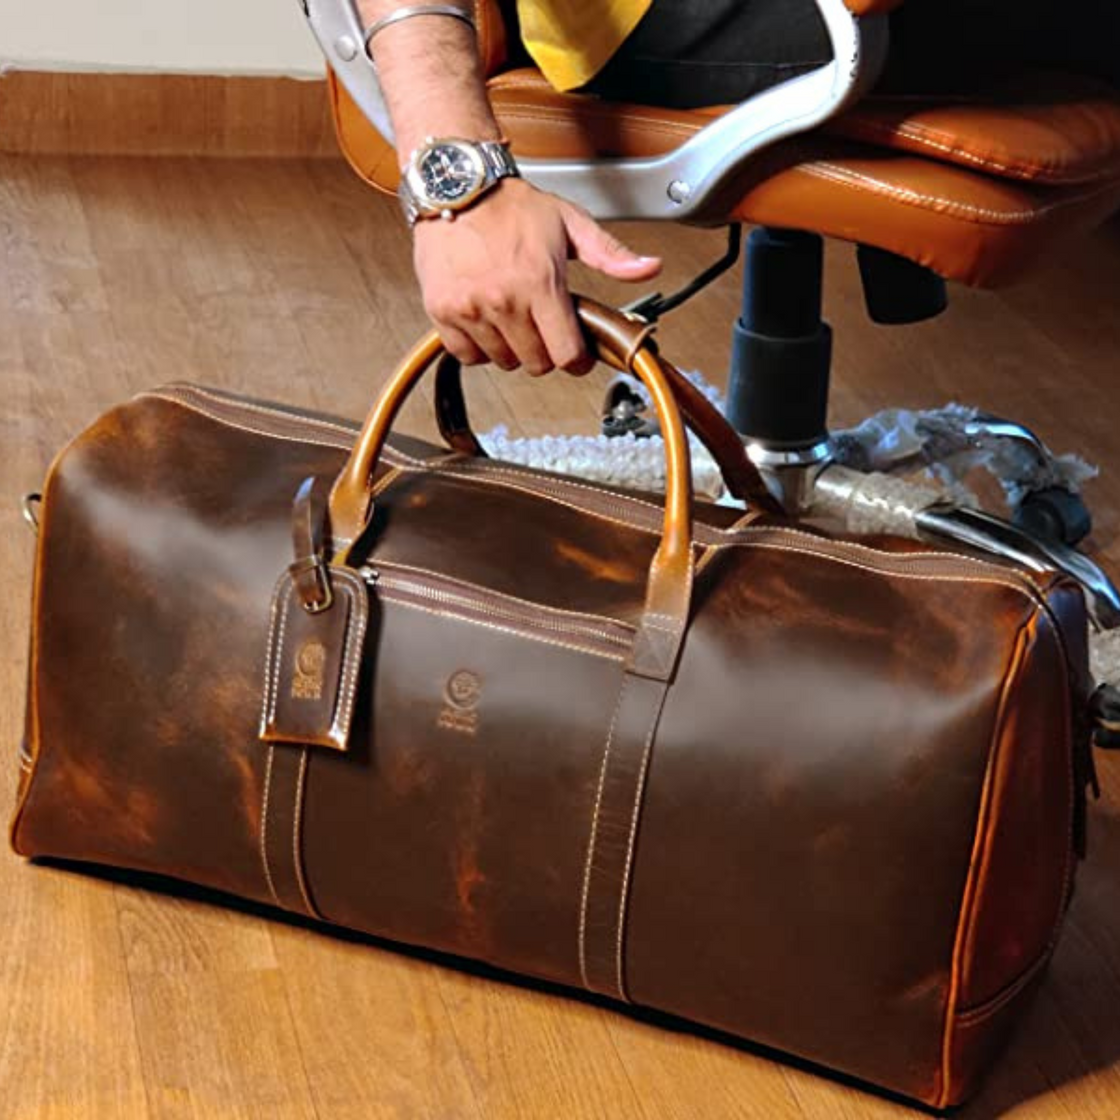 Roadstar Overnight Weekender Carry On Duffel Bag (24 Inches, Antique Brown)